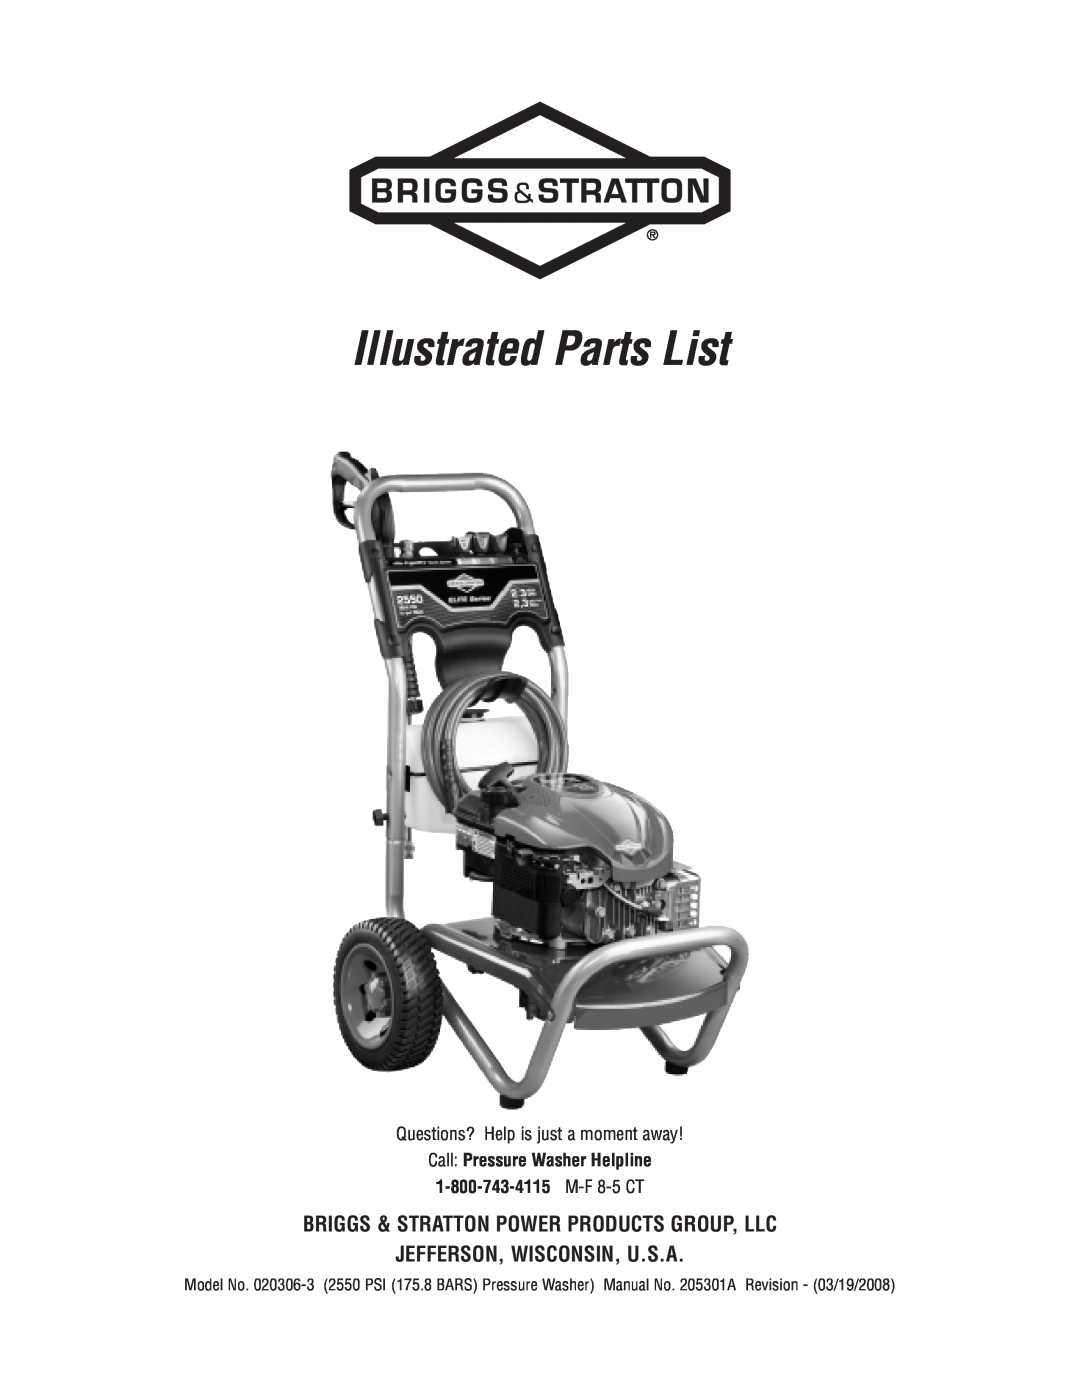 Briggs & Stratton 020306-3 manual Illustrated Parts List, Briggs & Stratton Power Products Group, Llc 